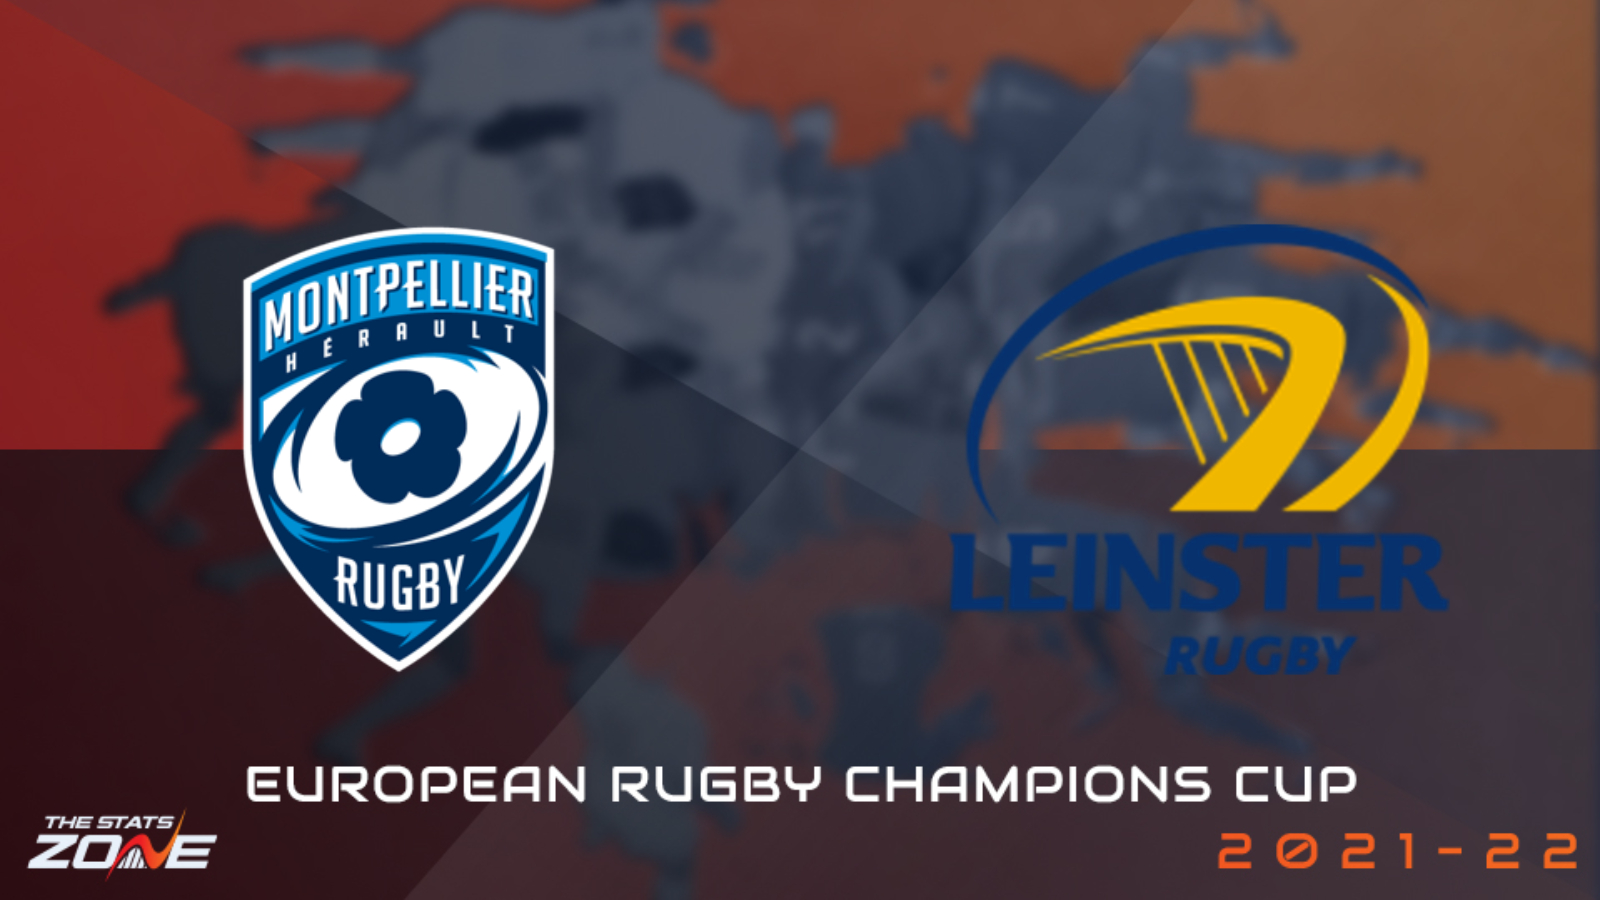 Montpellier vs Leinster Preview and Prediction